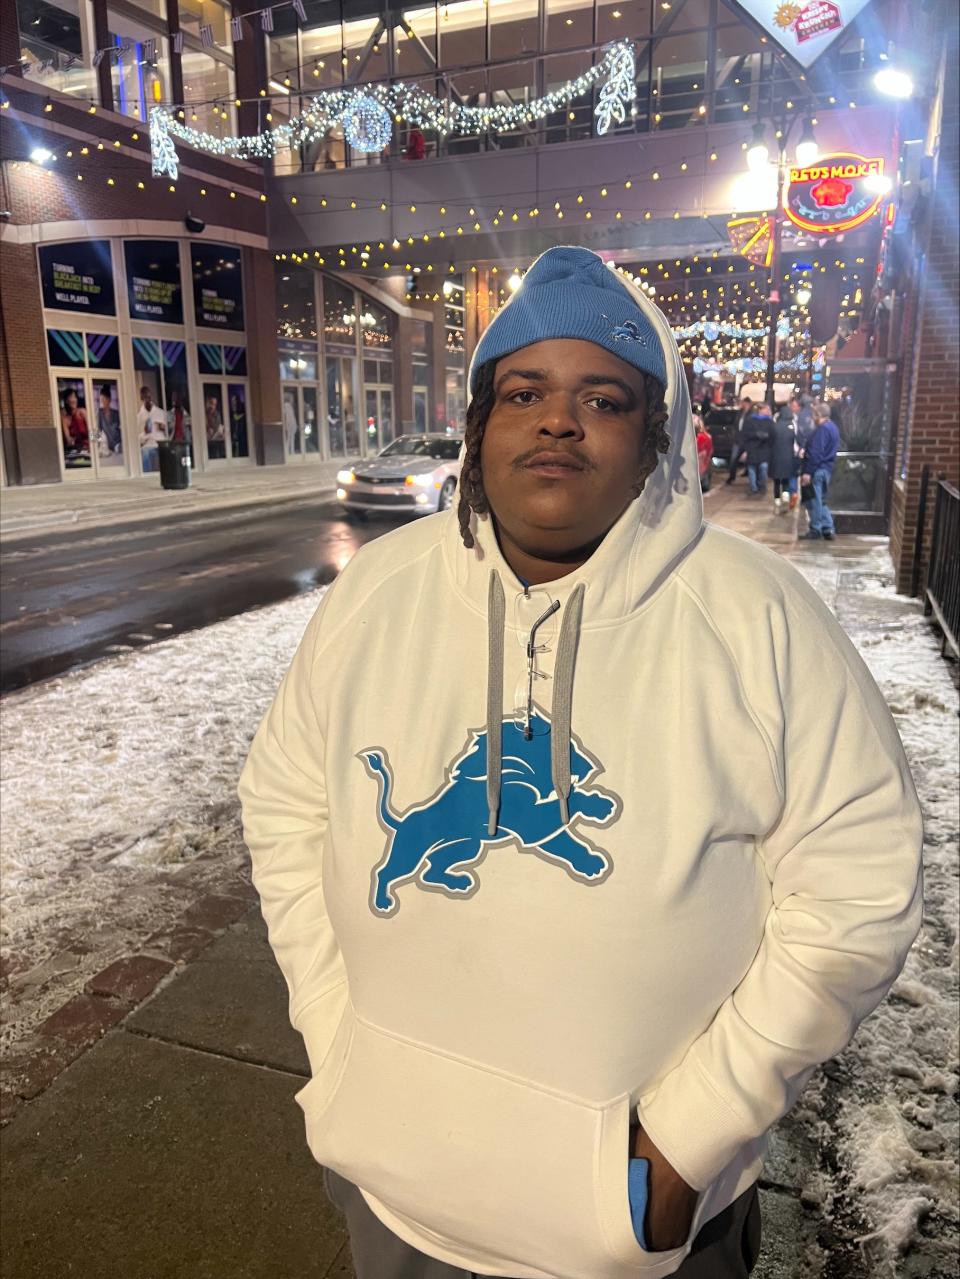 DJ Degree, 29 of Detroit, said the Lions winning gives a fan base and city hope. He enjoyed the win among exuberant fans driving through Greektown.